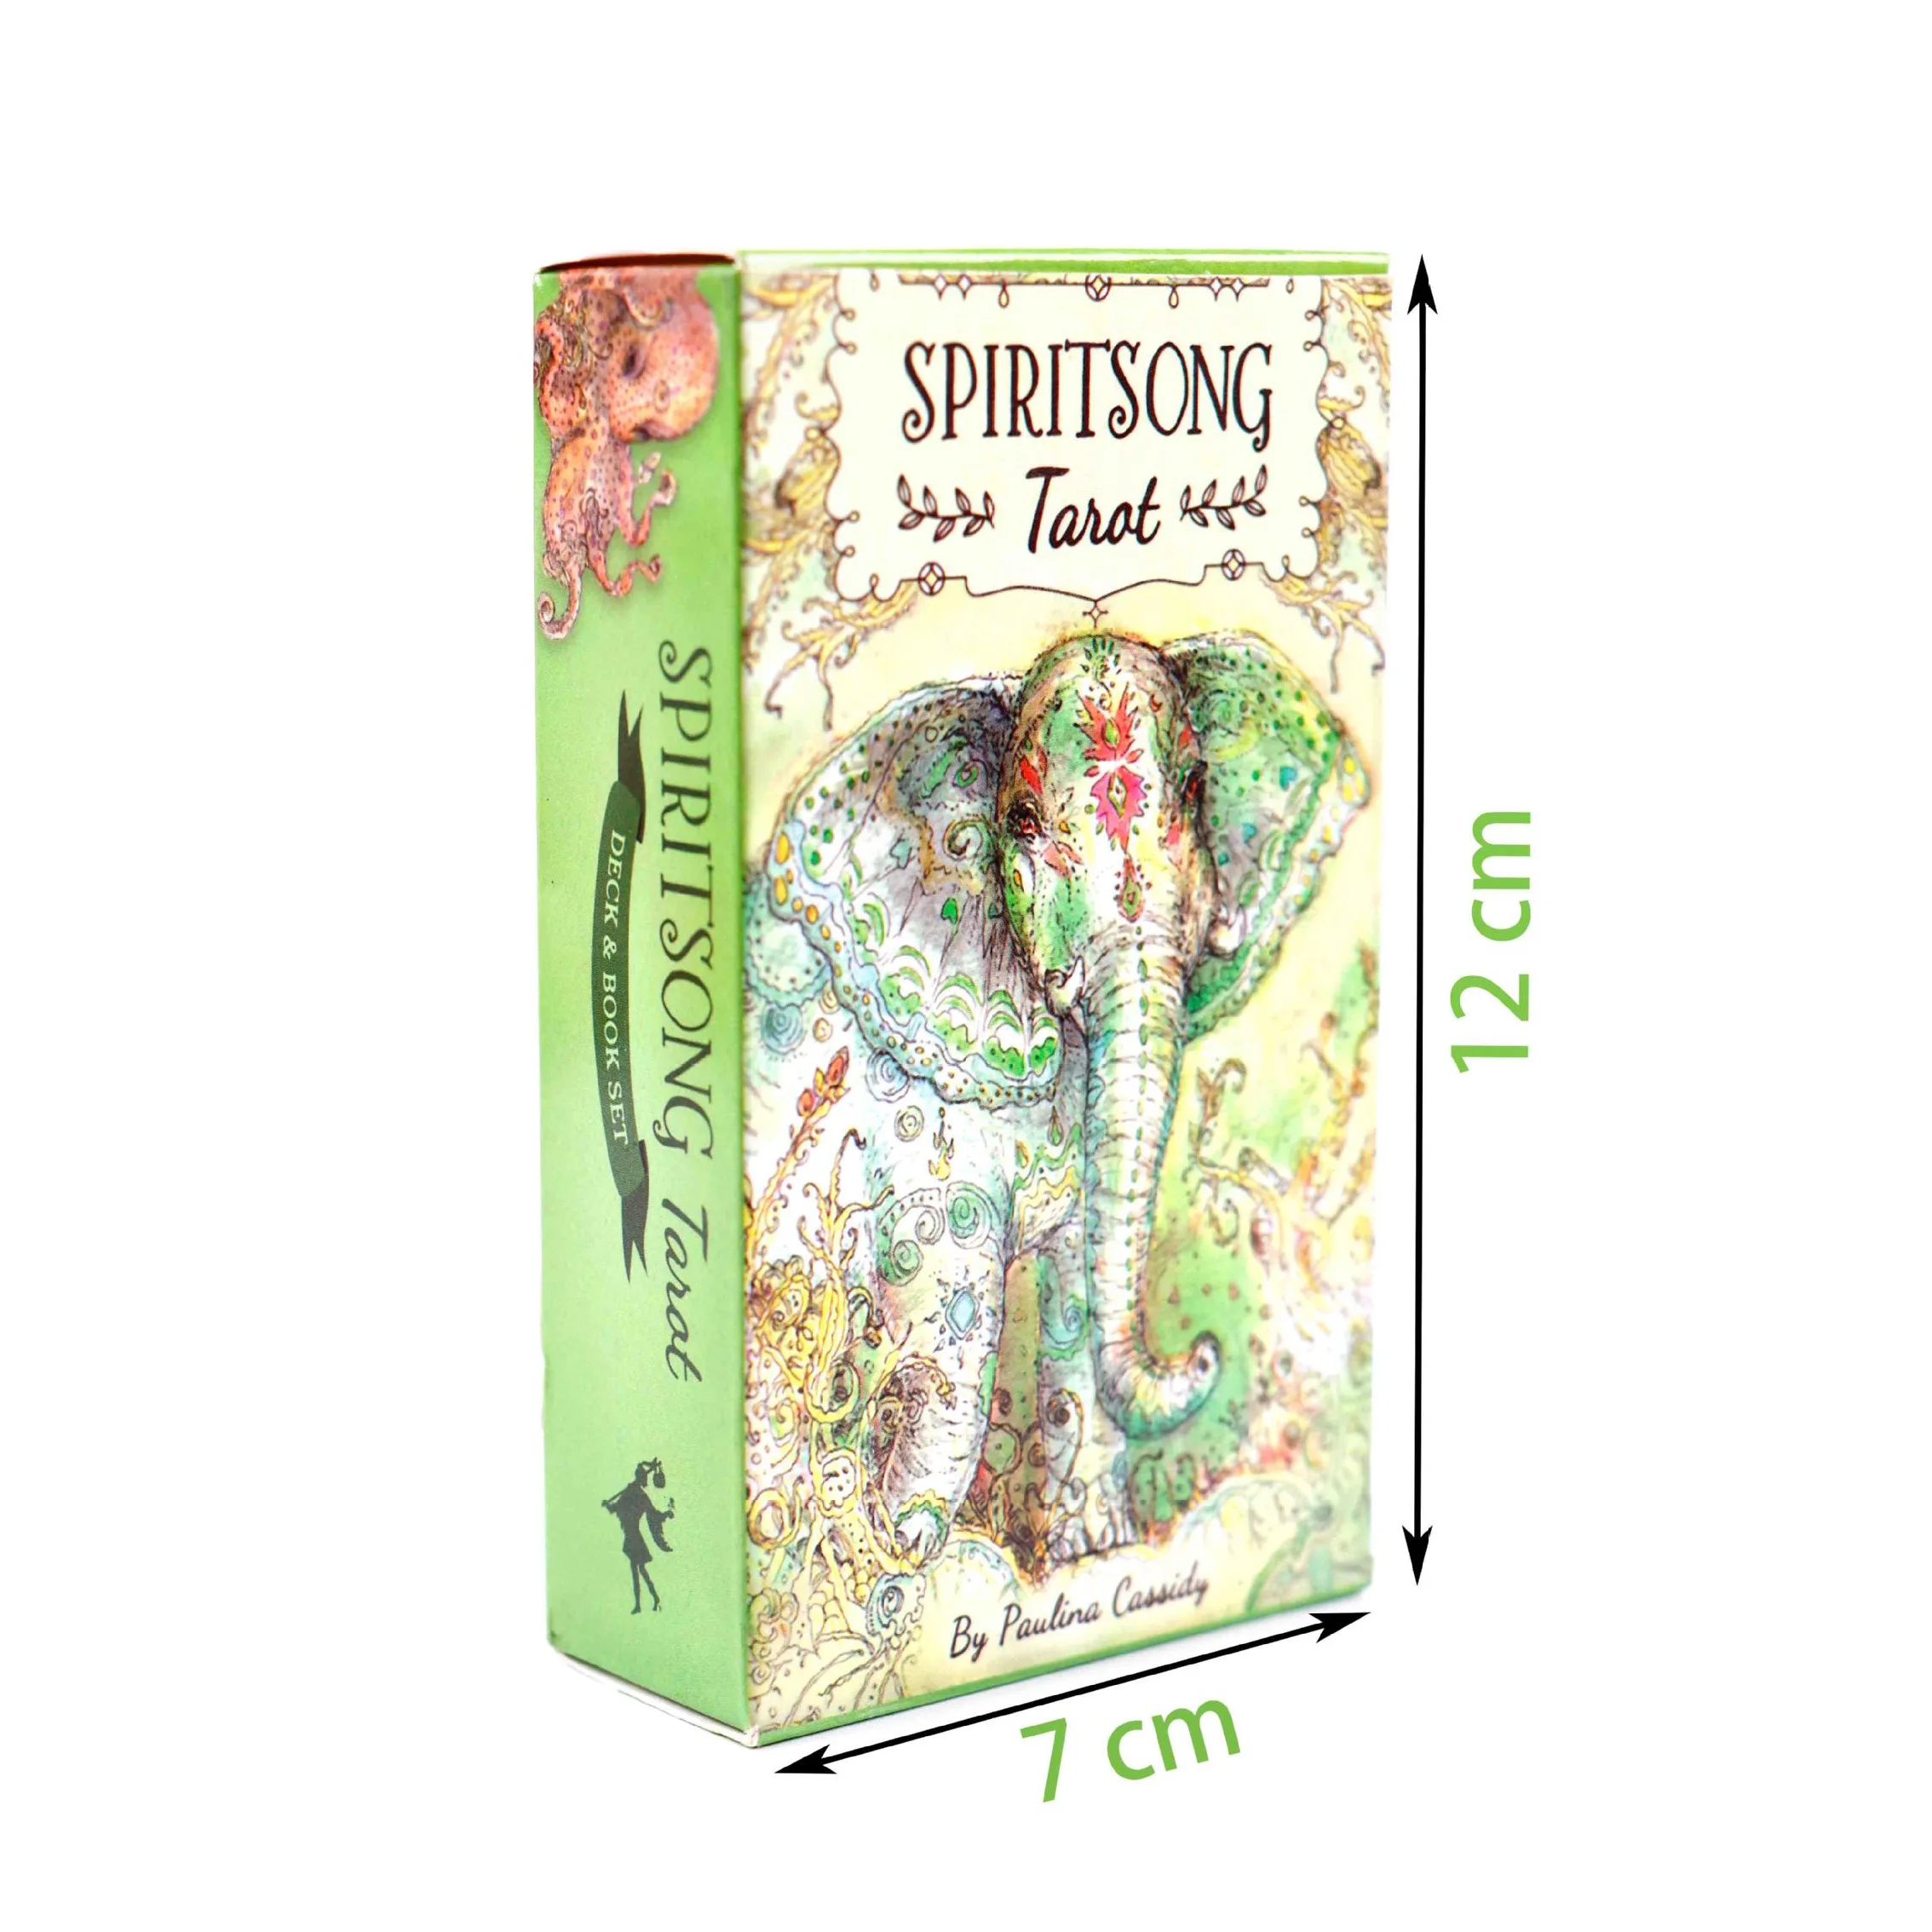 

Spiritsong Tarot Deck High Quality Fortune Telling Divination Oracle Cards Family Party original tarot deck